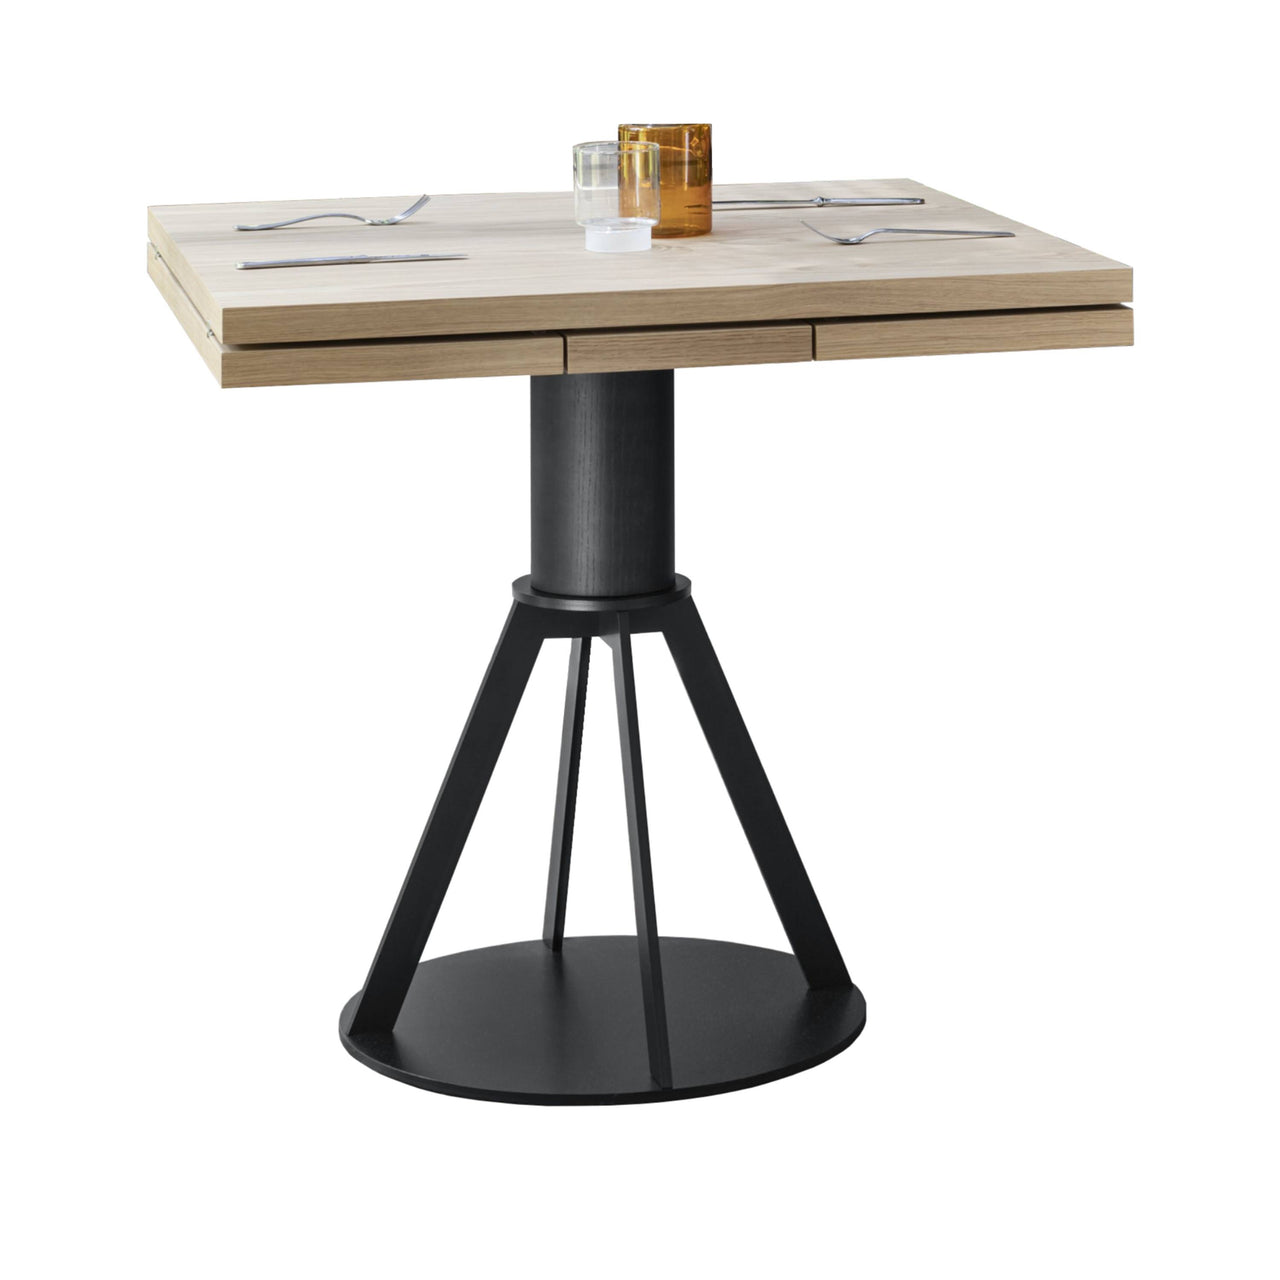 Geronimo Extendable Dining Table: Wood + Small - 31.5